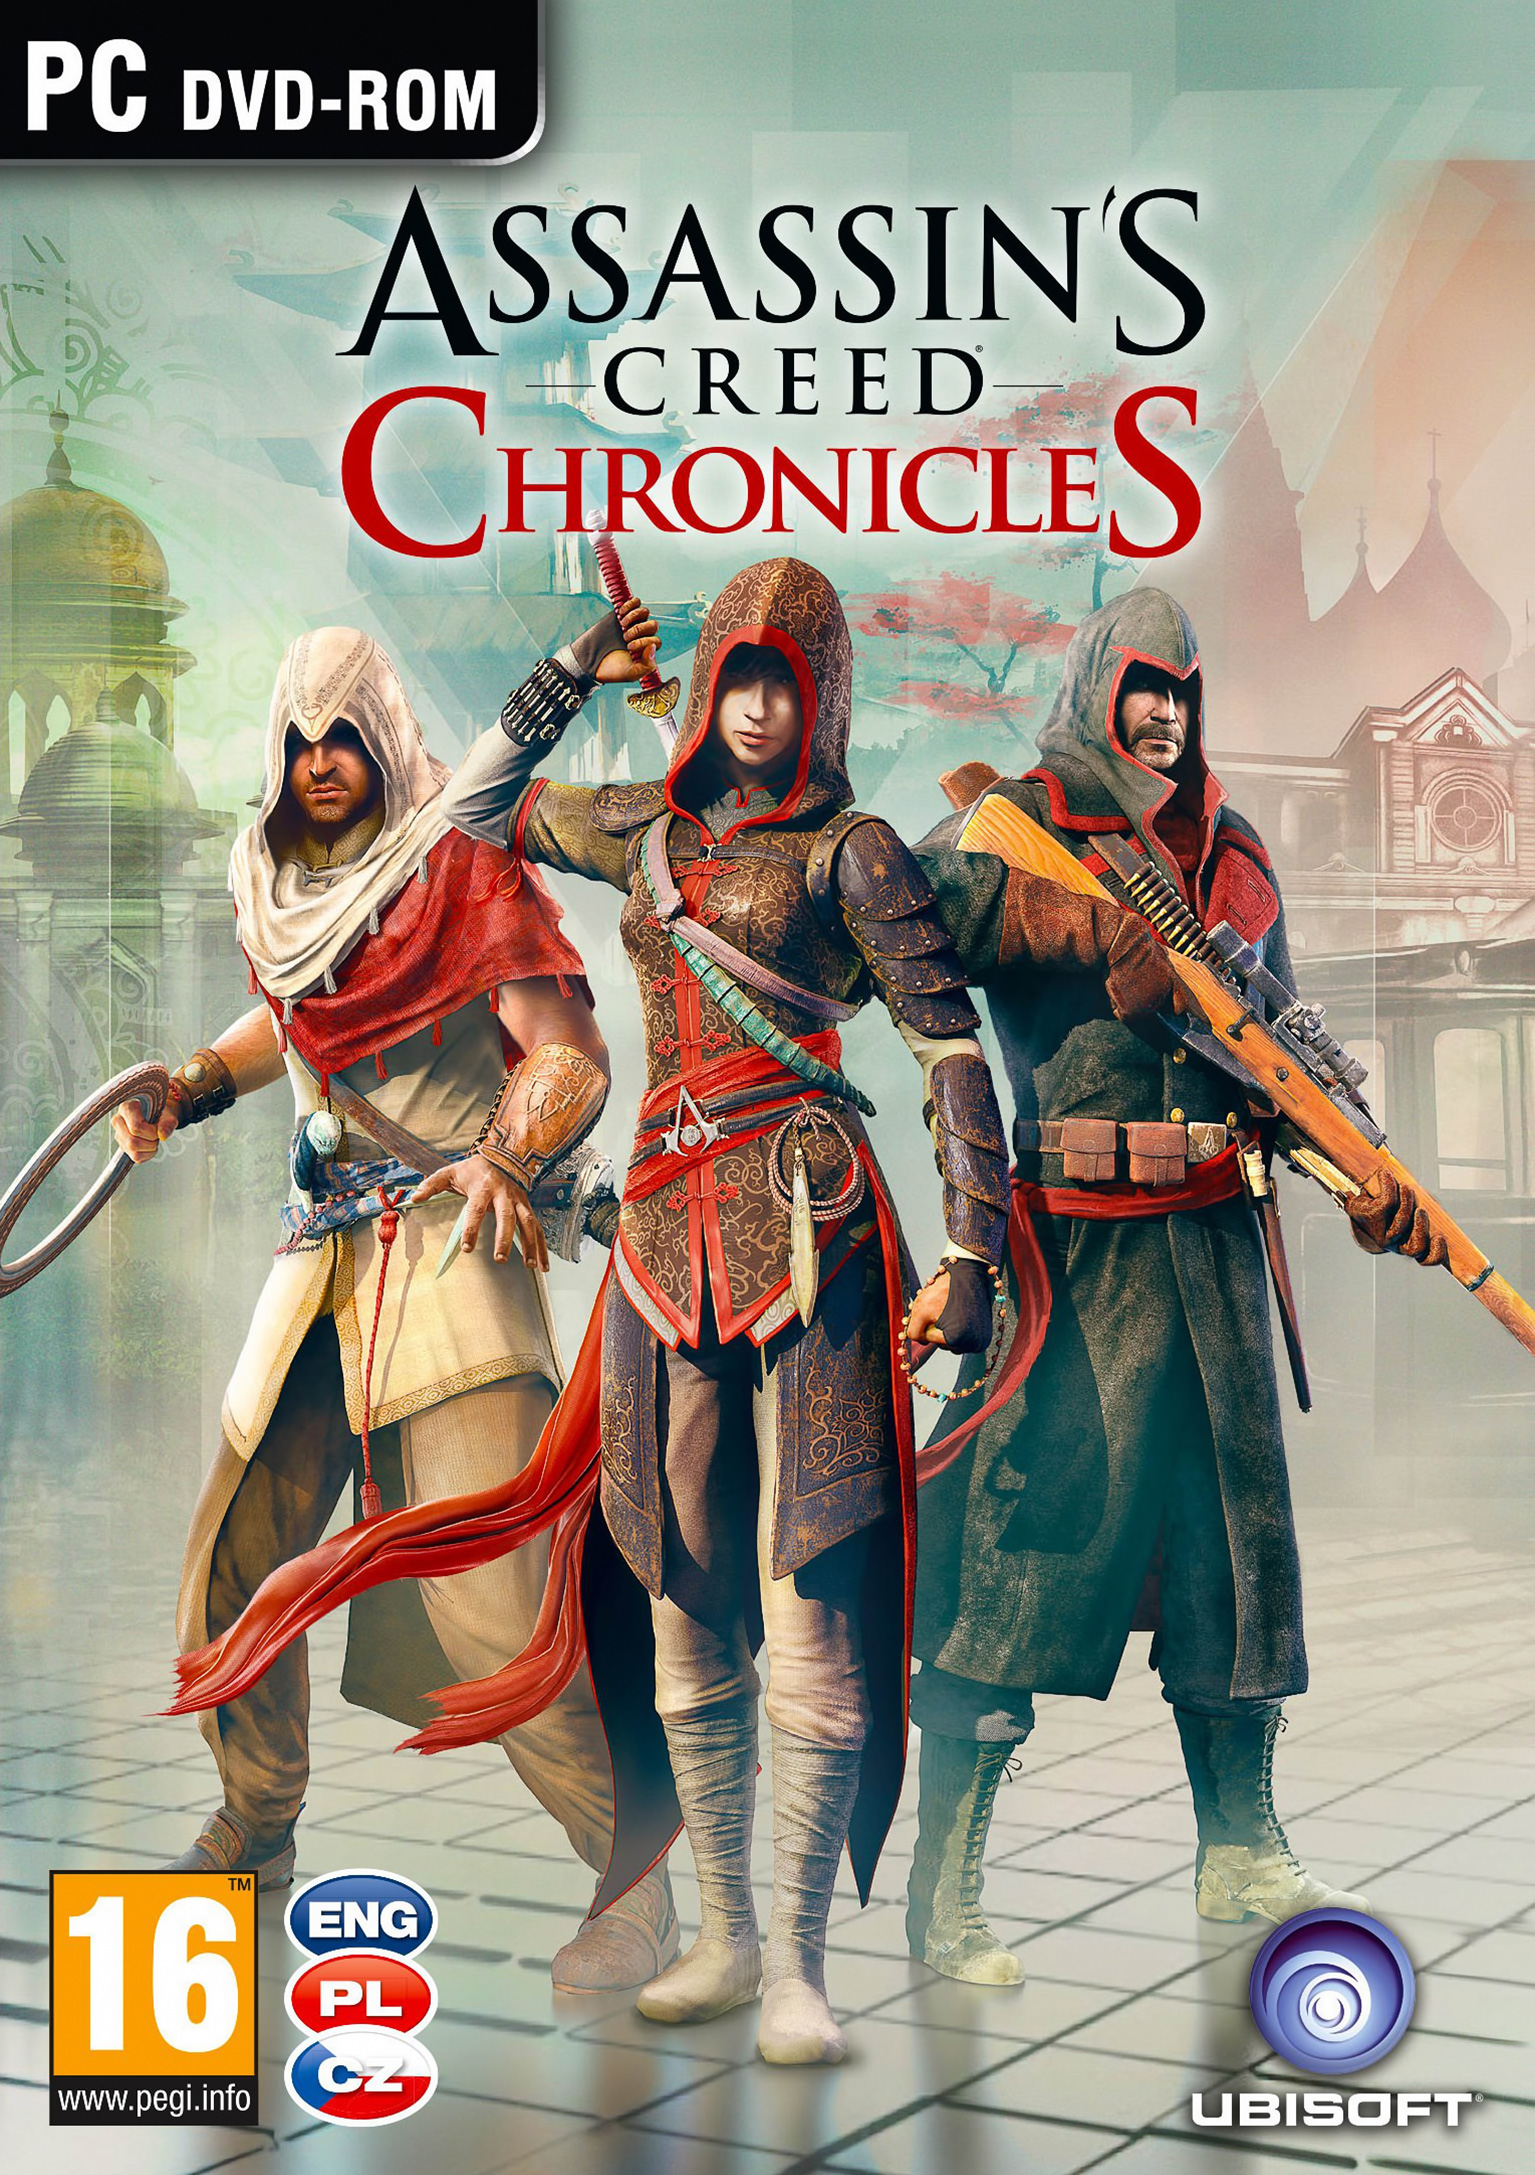 Assassin's Creed Chronicles: Trilogy - predn DVD obal